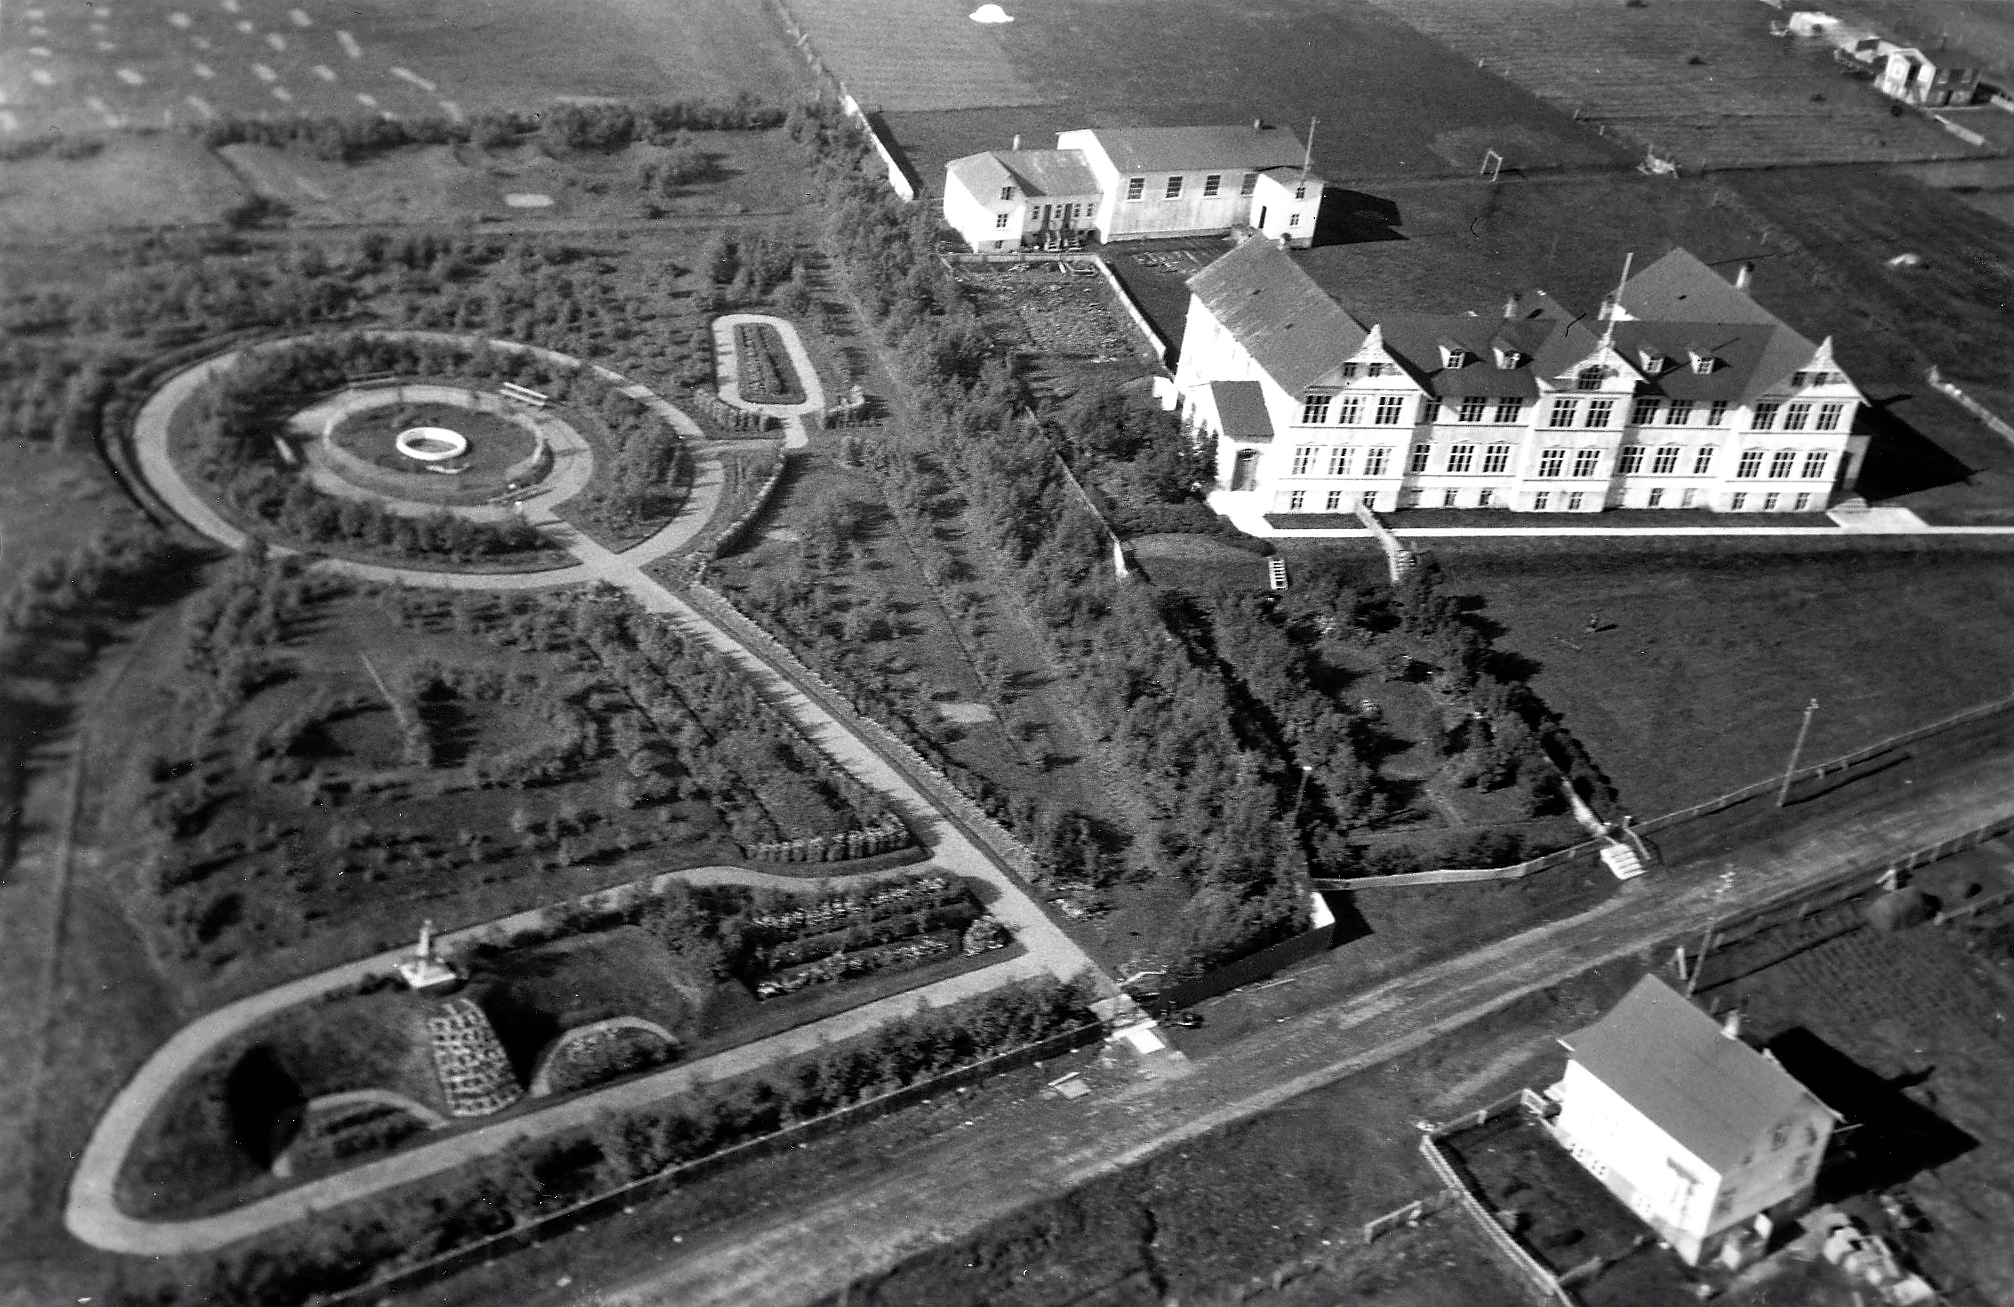 Picture of the Park as it looked betweet 1920-1930